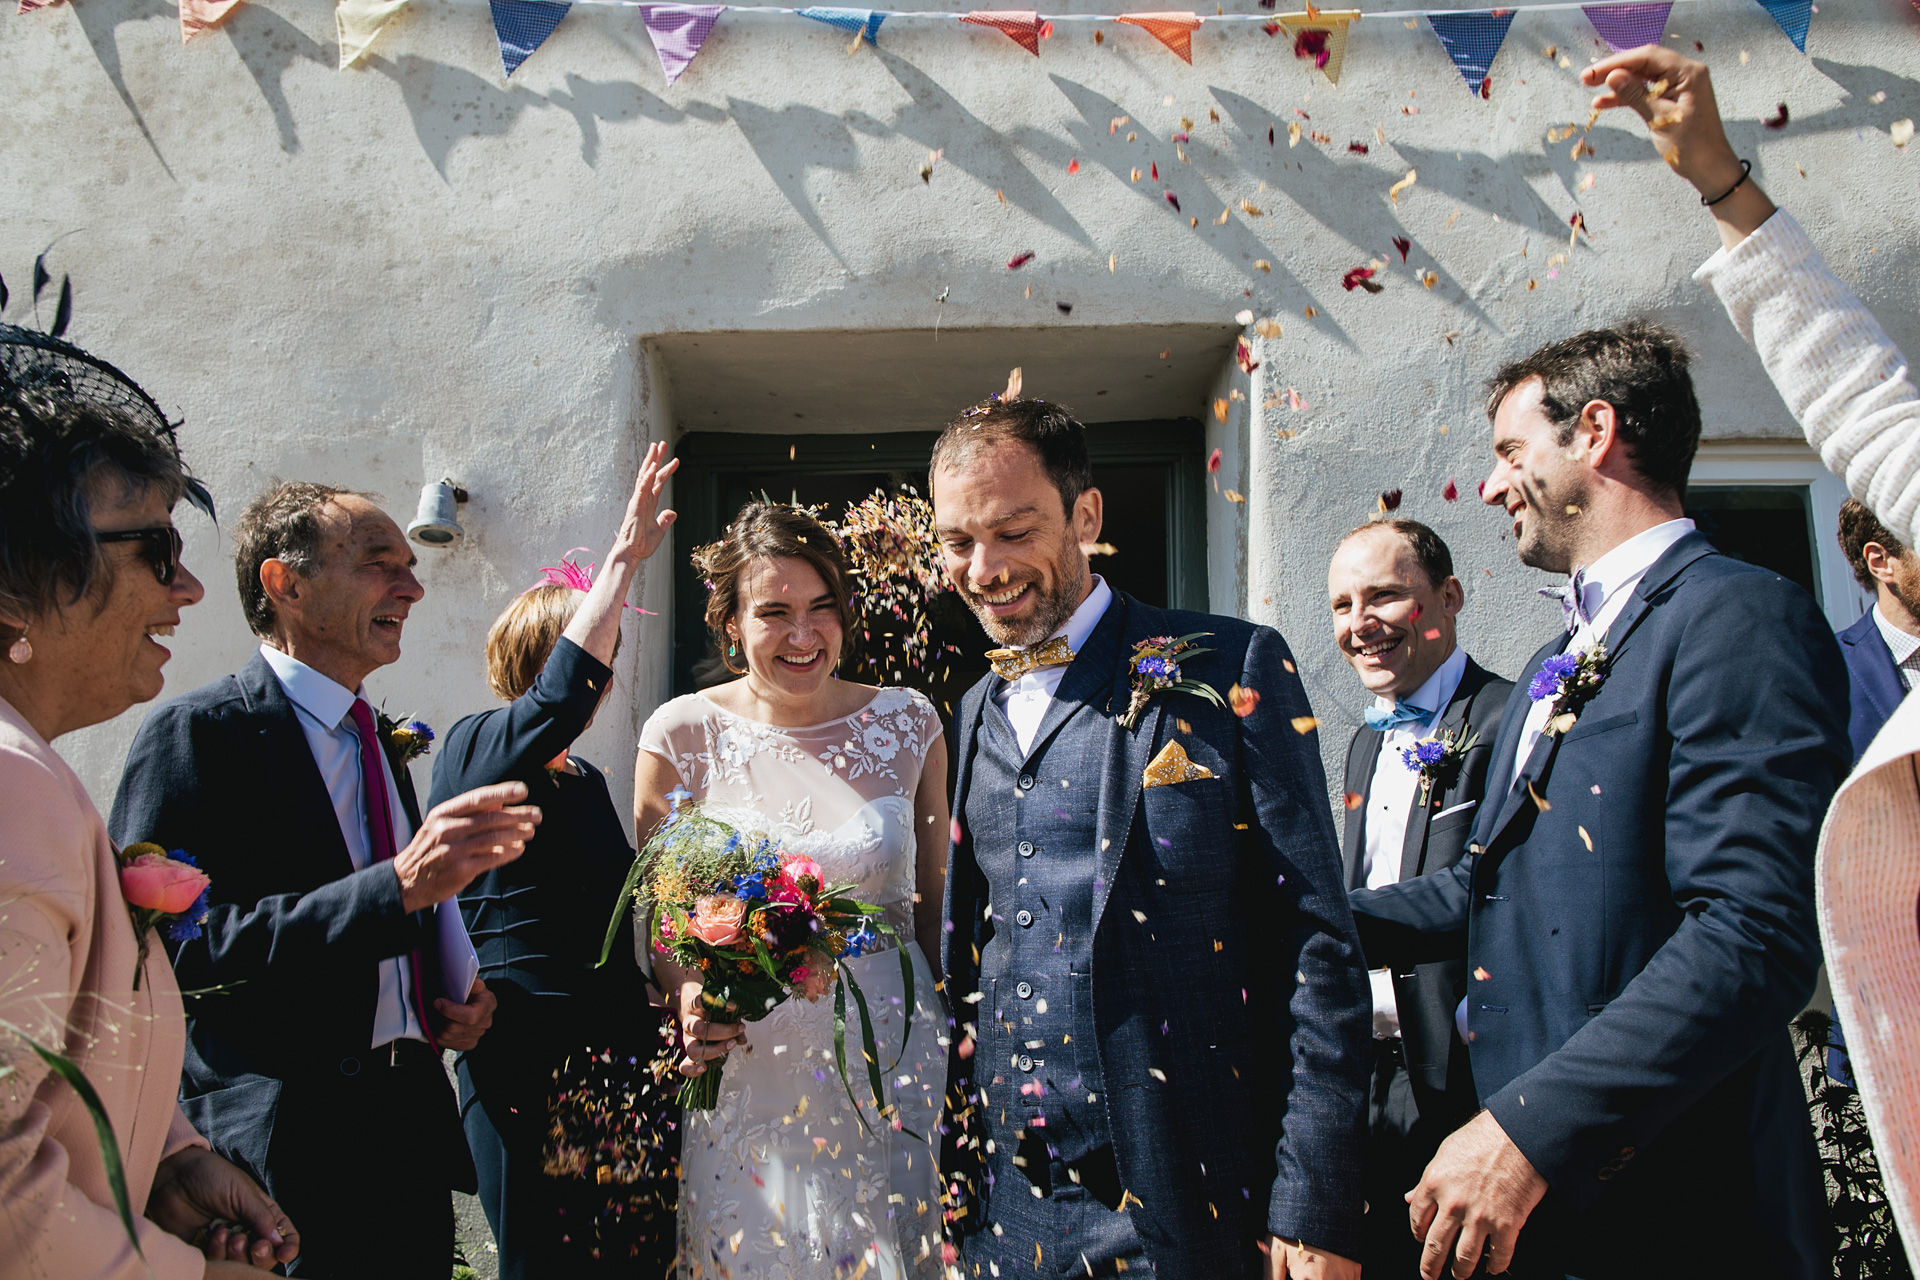 Bride and groom with guests throwing confetti